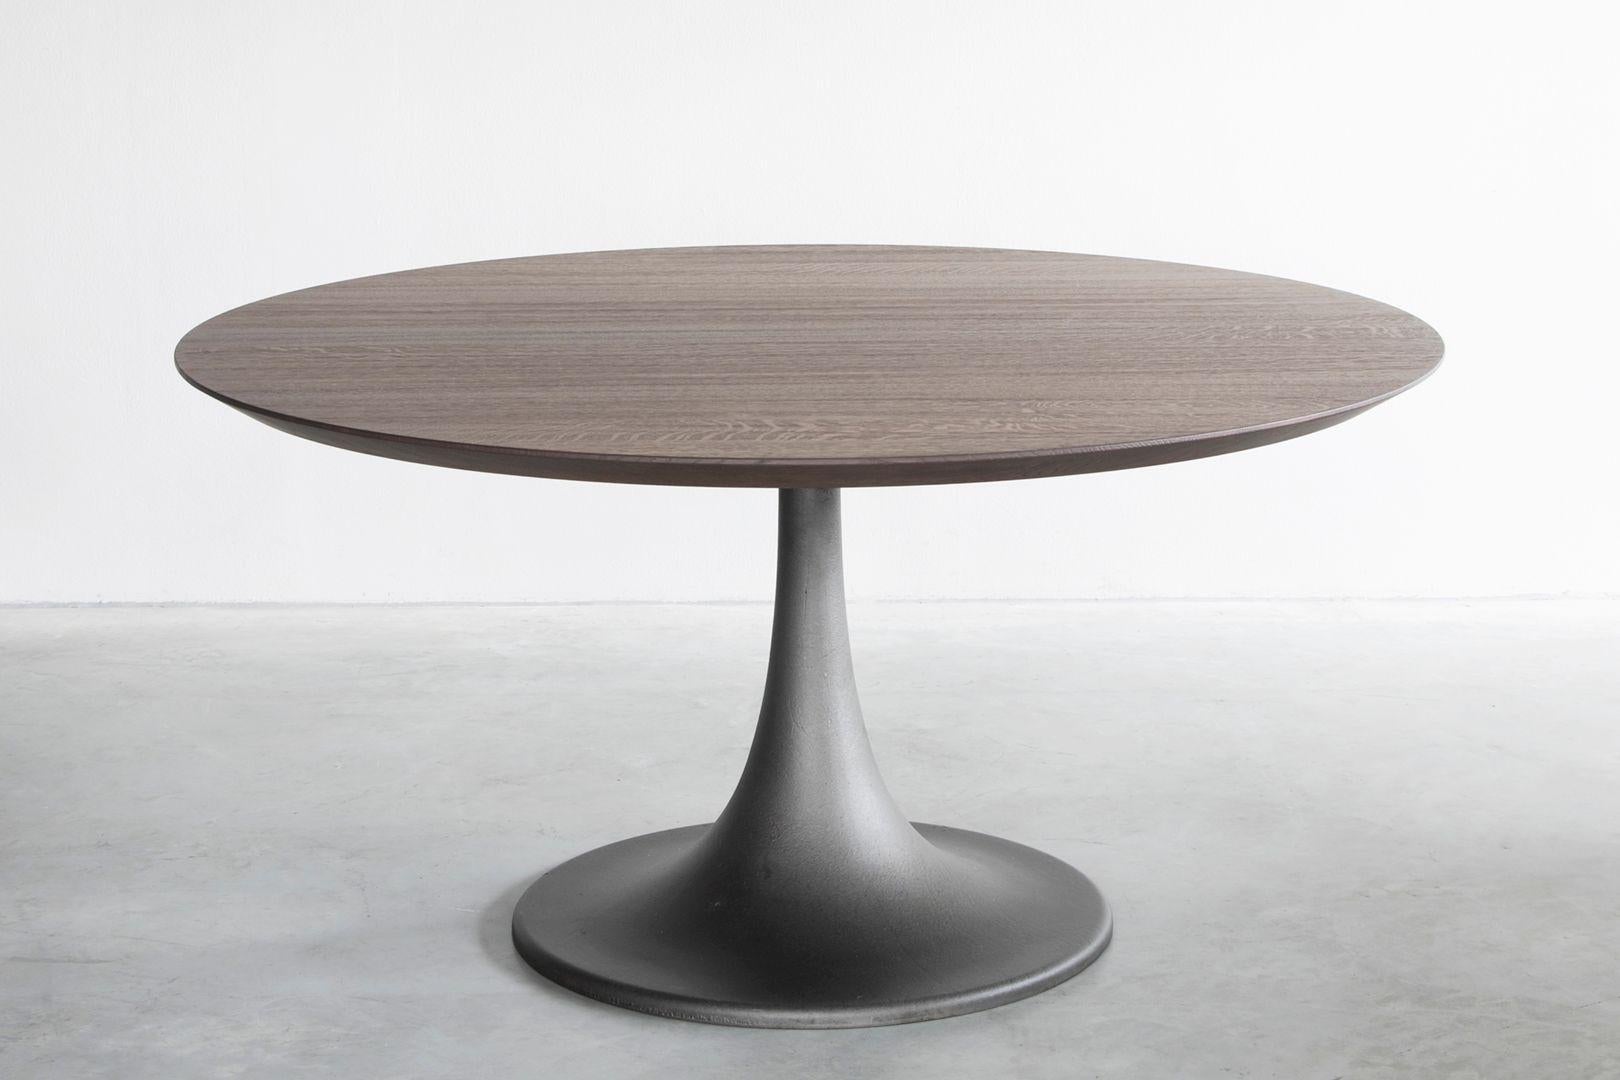 Ferrum dining table by Van Rossum
Dimensions: D170 x W170 x H74 cm
Materials: Oak, Iron.

The wood is available in all standard Van Rossum colors, or in a matching finish to customer’s own sample. The base of Ferrum is hand-moulded, and